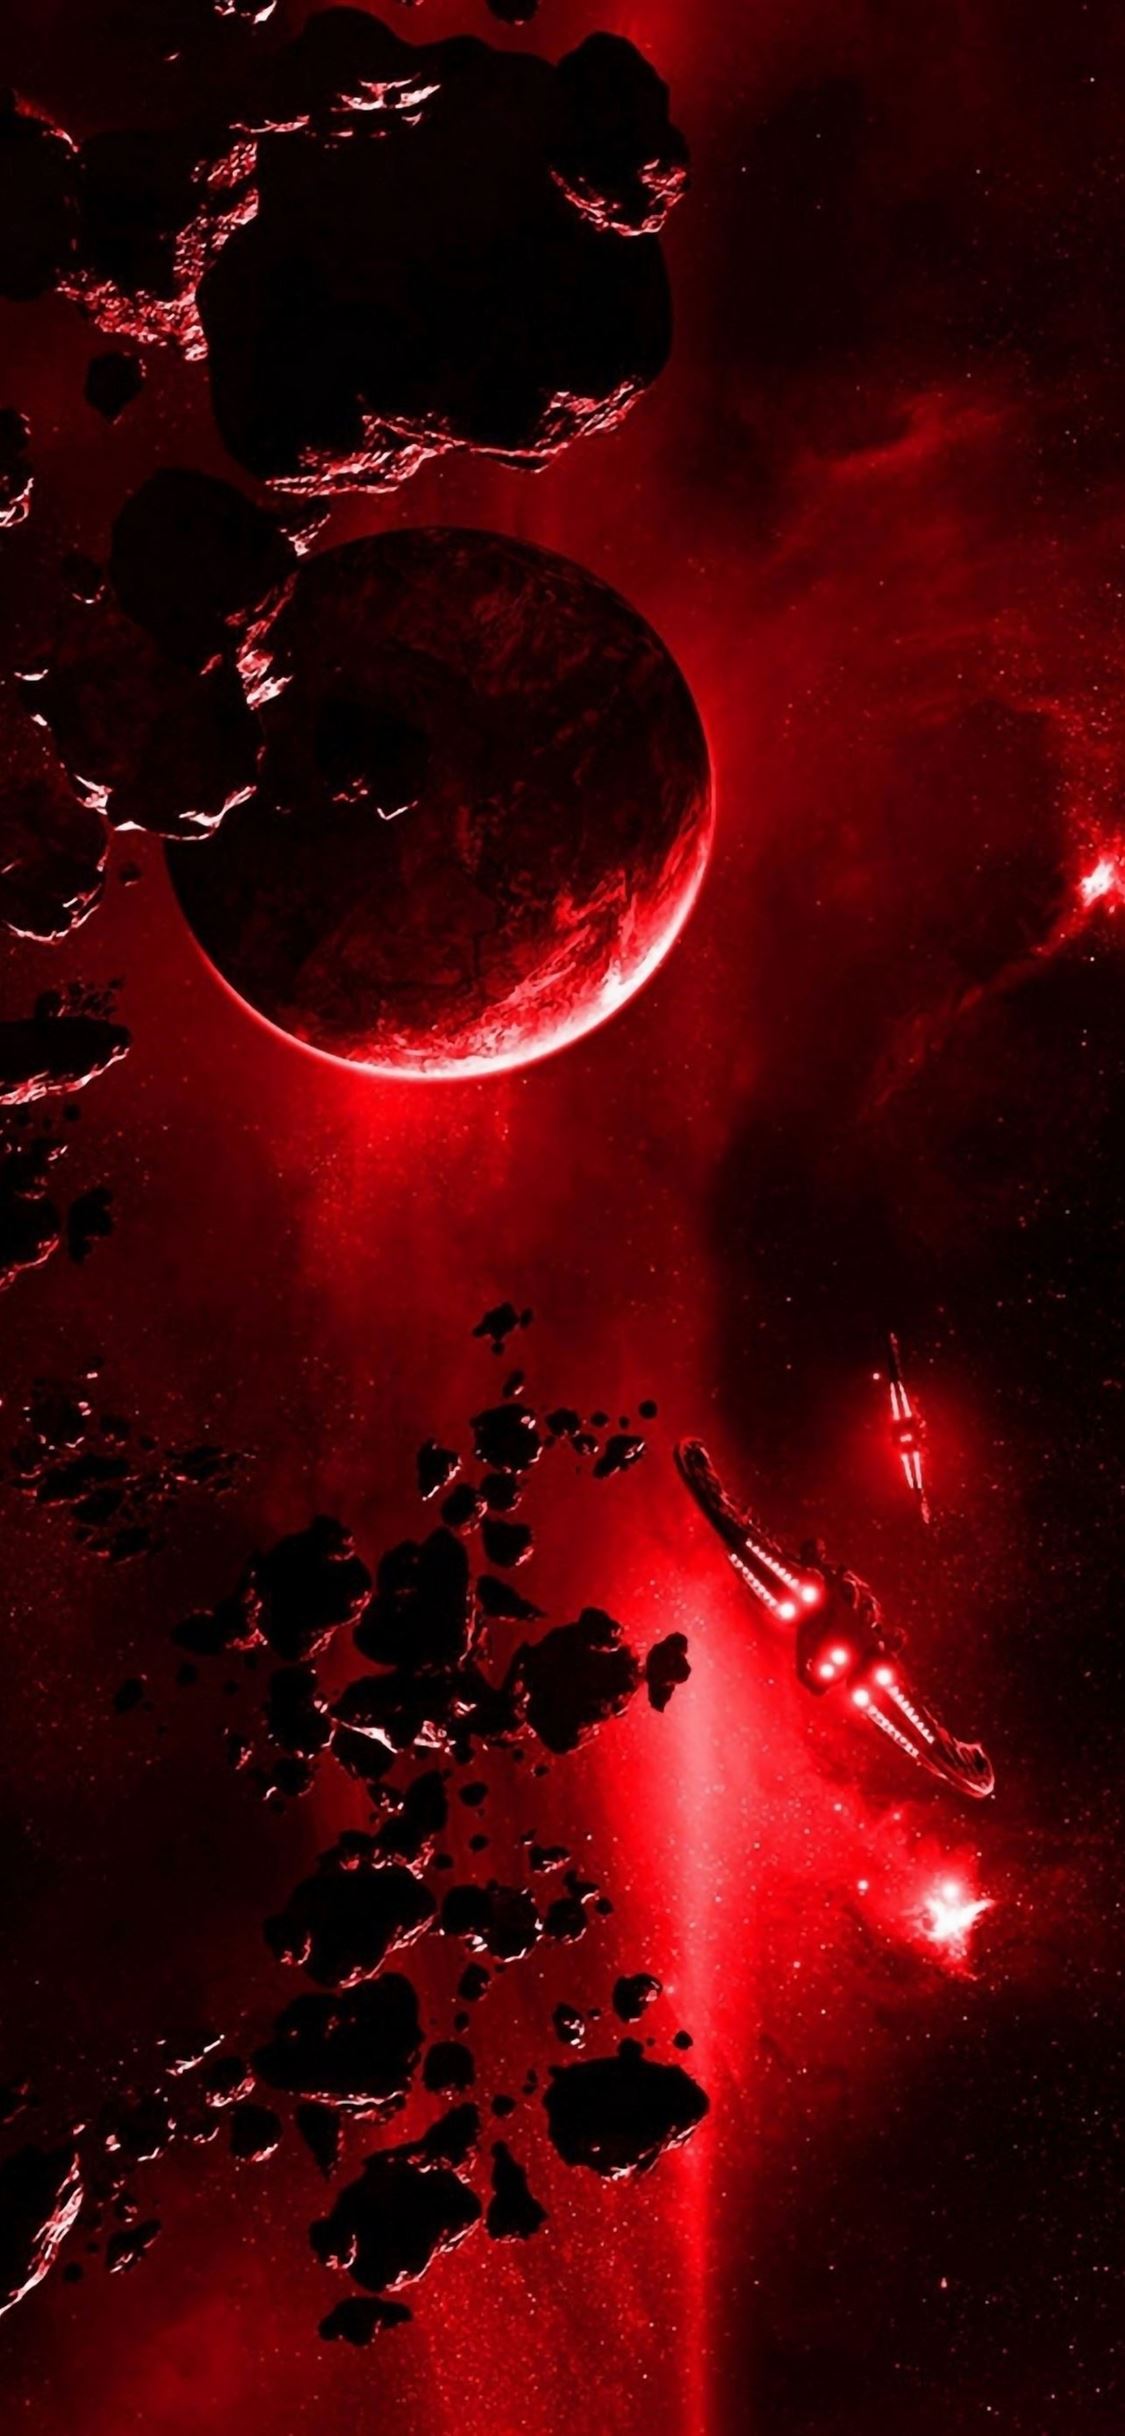 Red Planet Explosion Light From Space iPhone wallpaper 